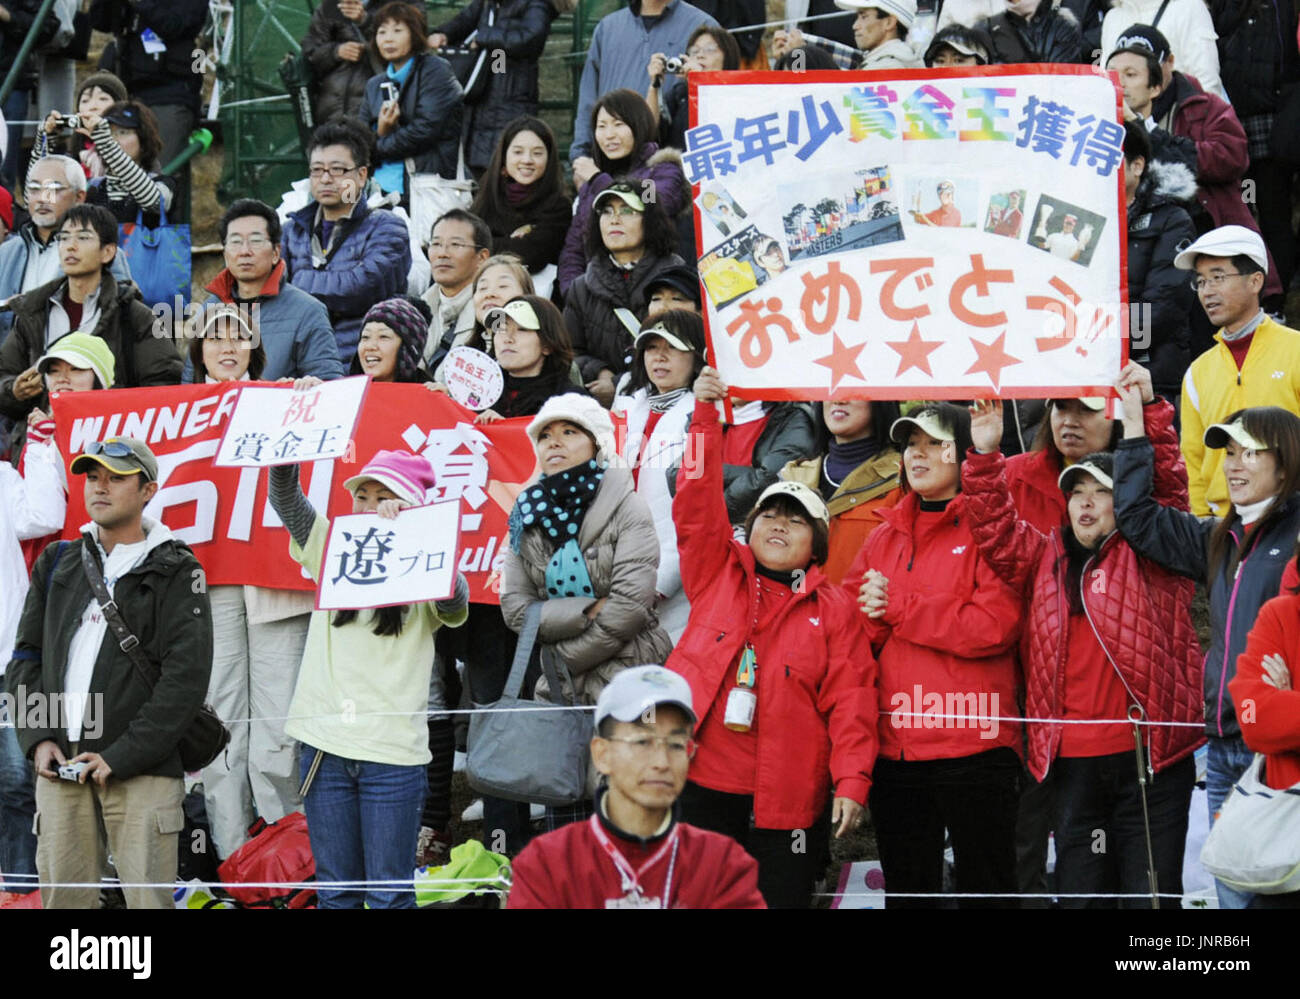 TOKYO, Japan - Fans cheer star golfer Ryo Ishikawa during the Nippon Series JT Cup at Tokyo Yomiuri Country Club on Dec. 6, 2009. The 18-year-old star golfer, who placed 19th in the season's final tournament, became the youngest money champion in Japanese golf history. (Kyodo) Stock Photo